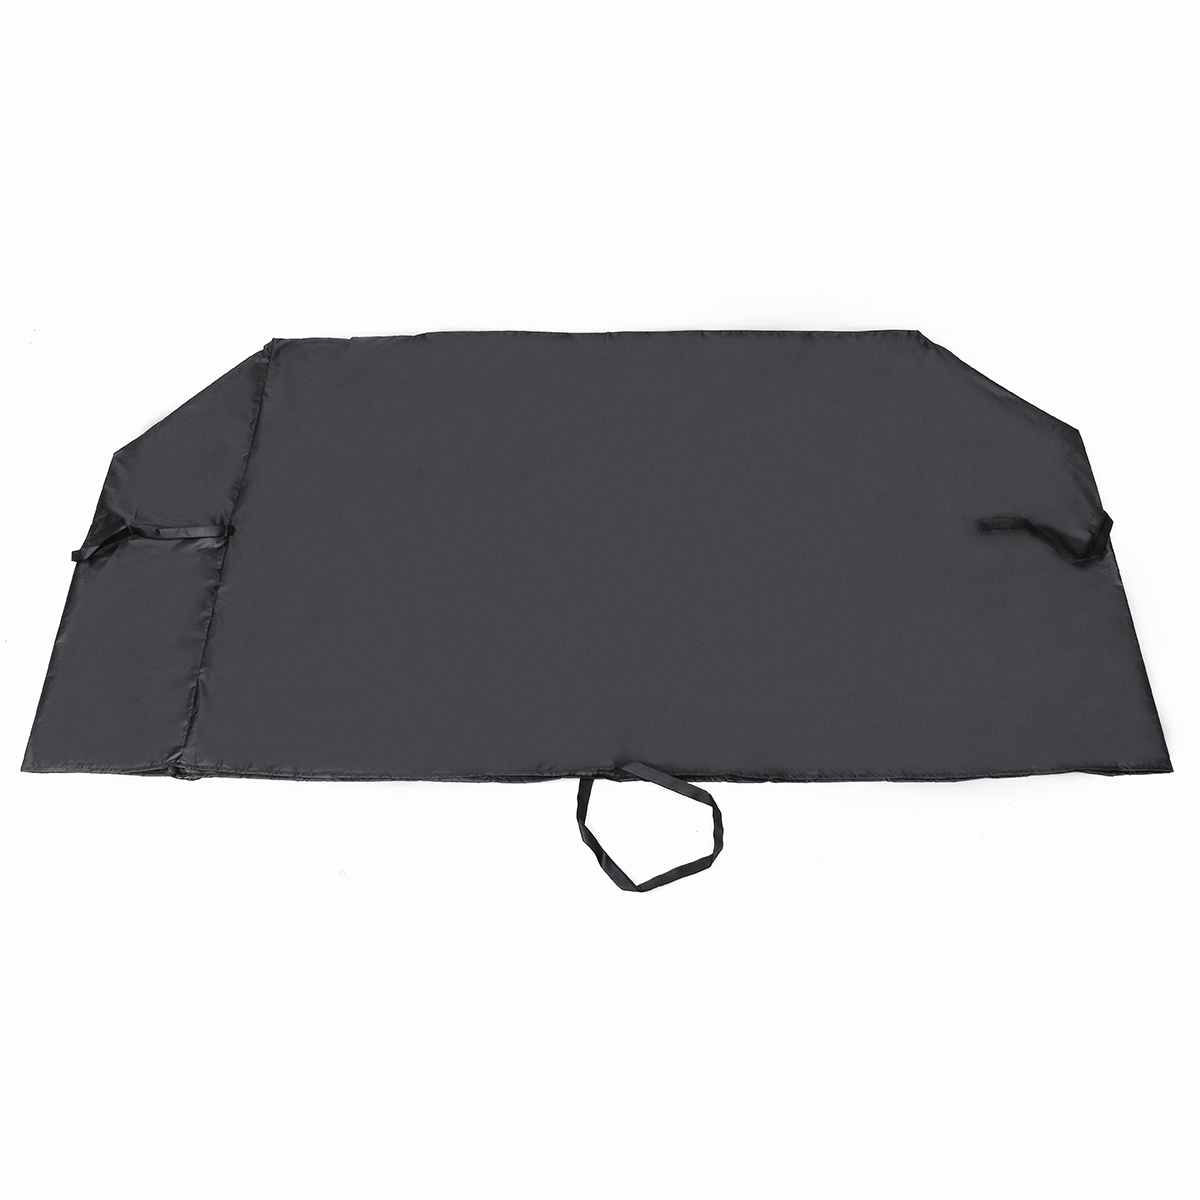 1422x558x1016-cm-BBQ-Grill-Cover-Waterproof-Anti-dust-Gas-Charcoal-Barbecue-Protector-Outdoor-Campin-1711679-7